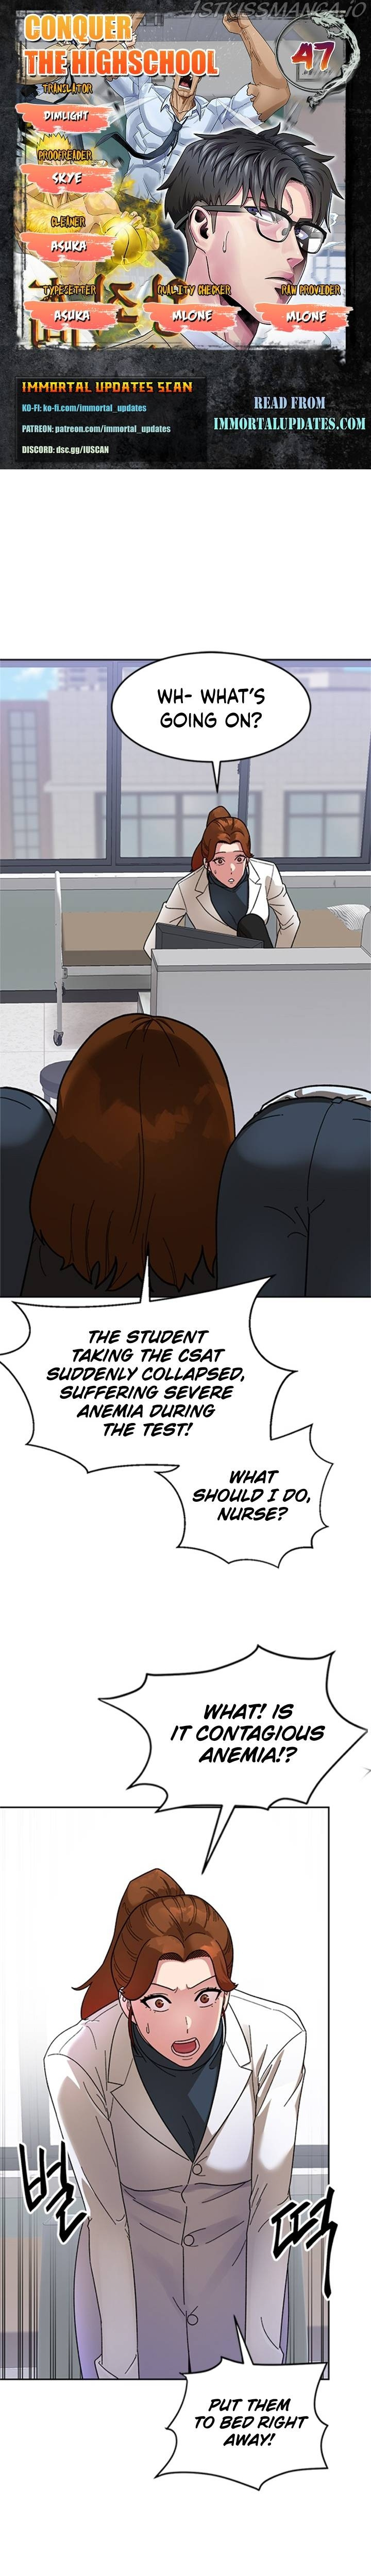 Conquer The Throne Highschool - Page 1